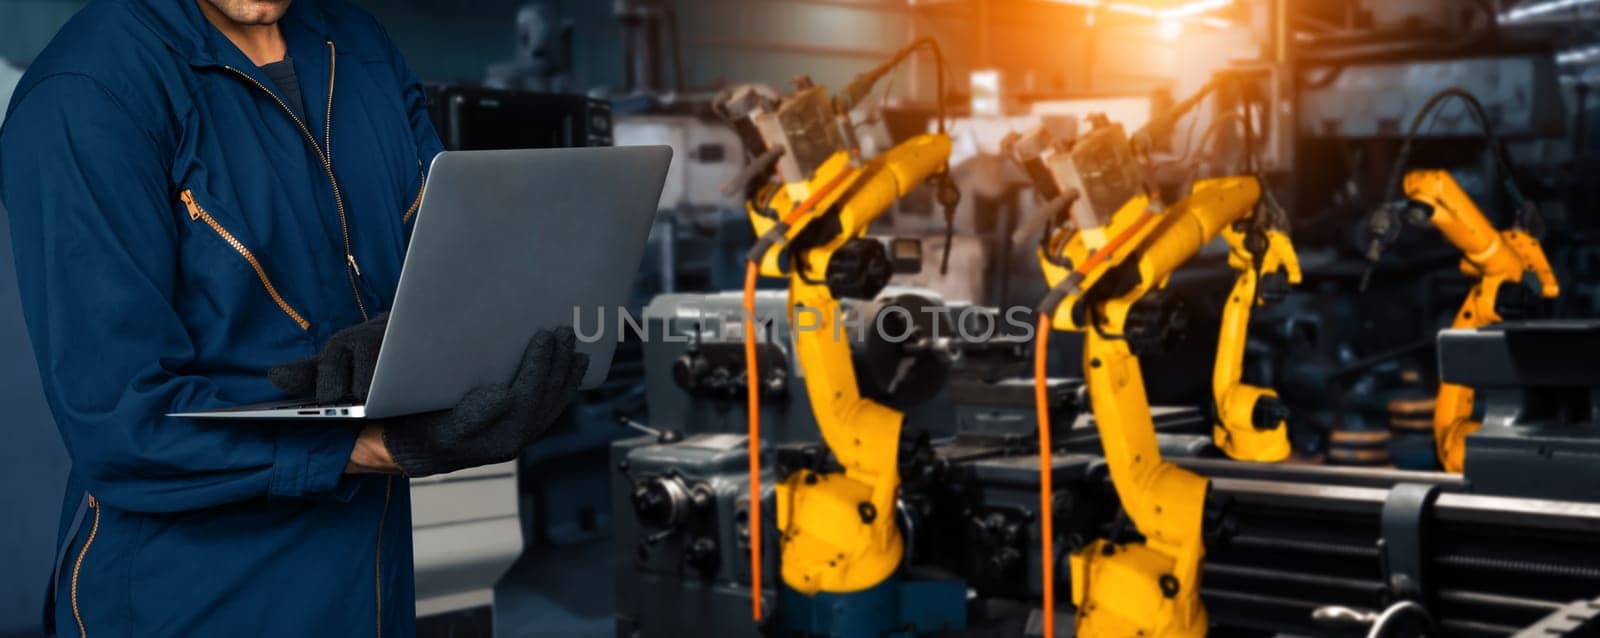 XAI Engineer use advanced robotic software to control industry robot arm in factory by biancoblue